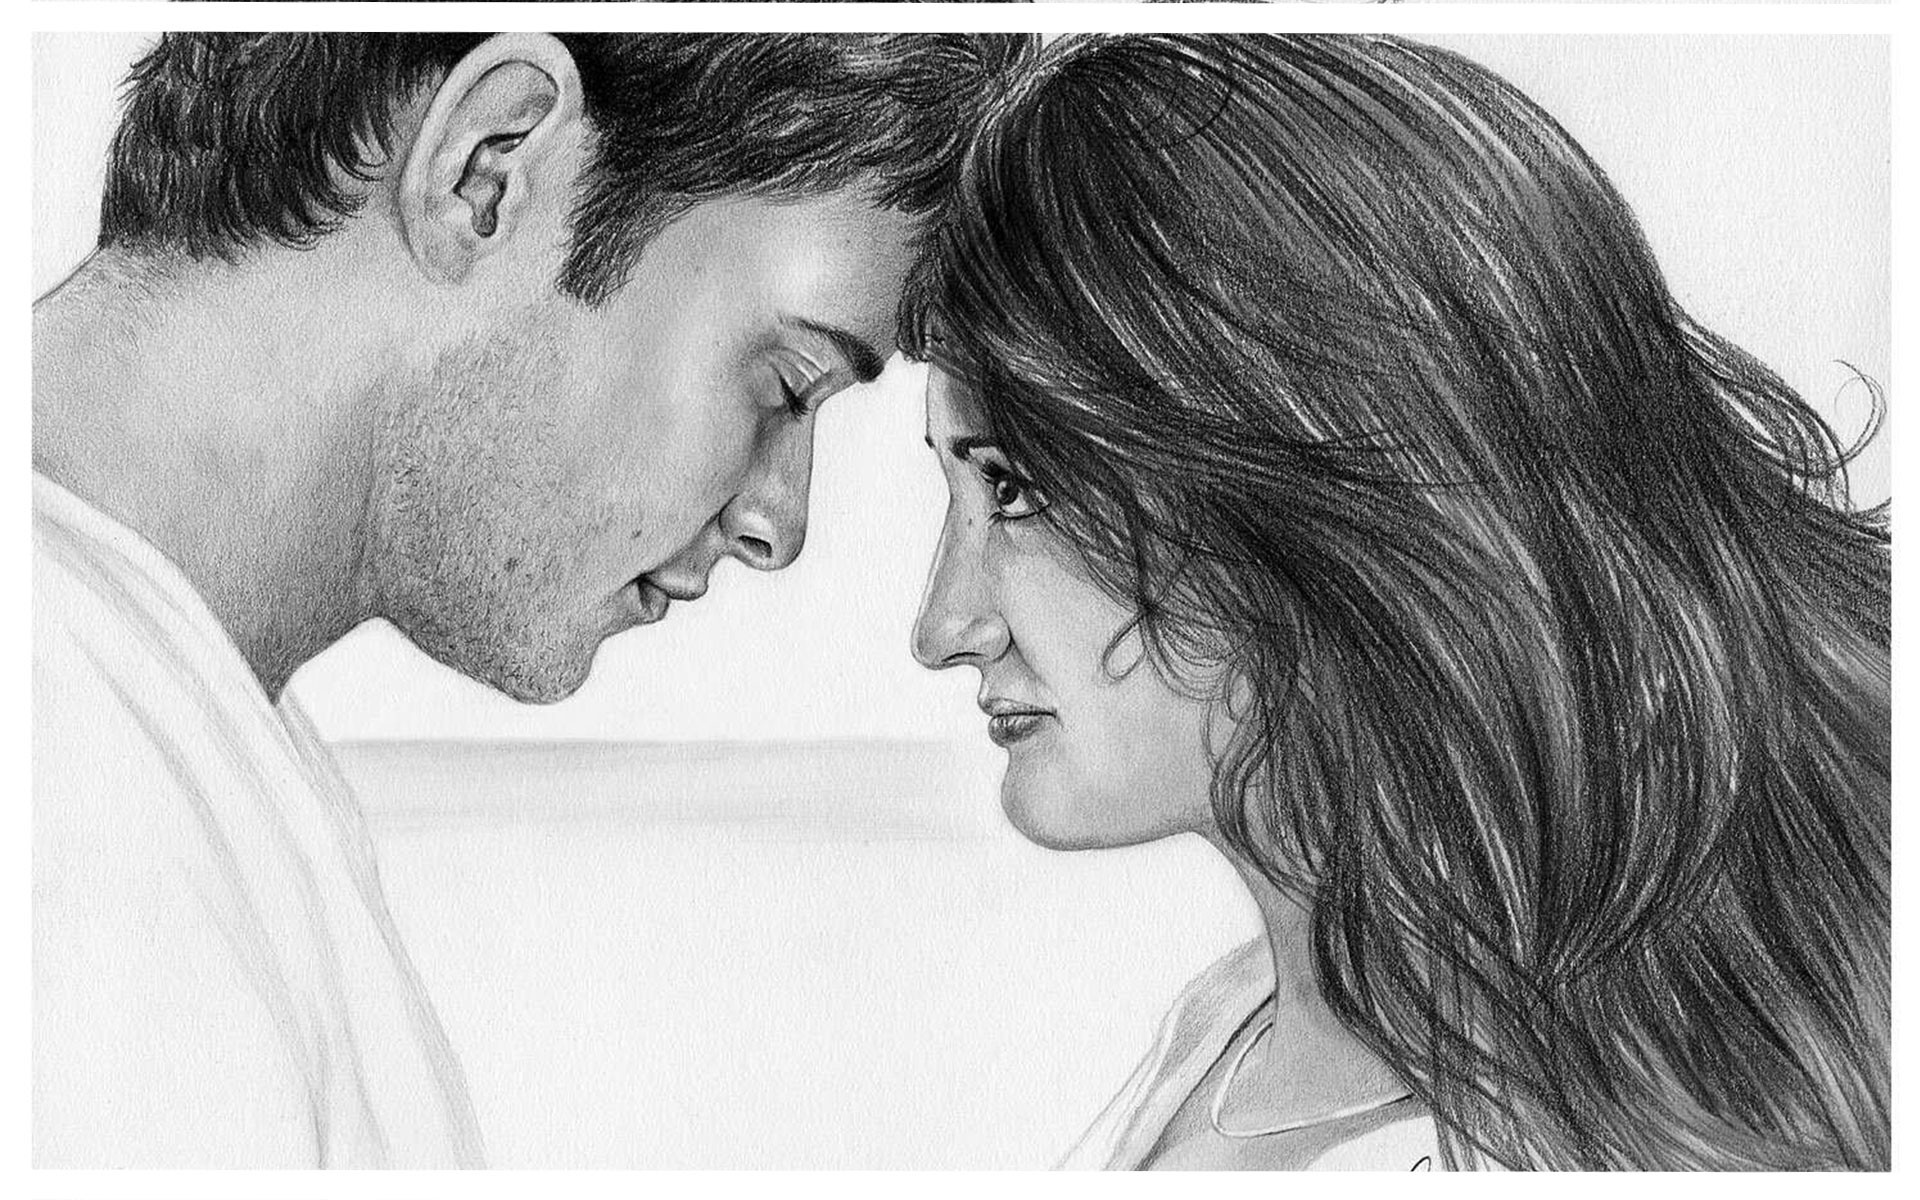 Couple Pencil Art Images Of Love - Game Master